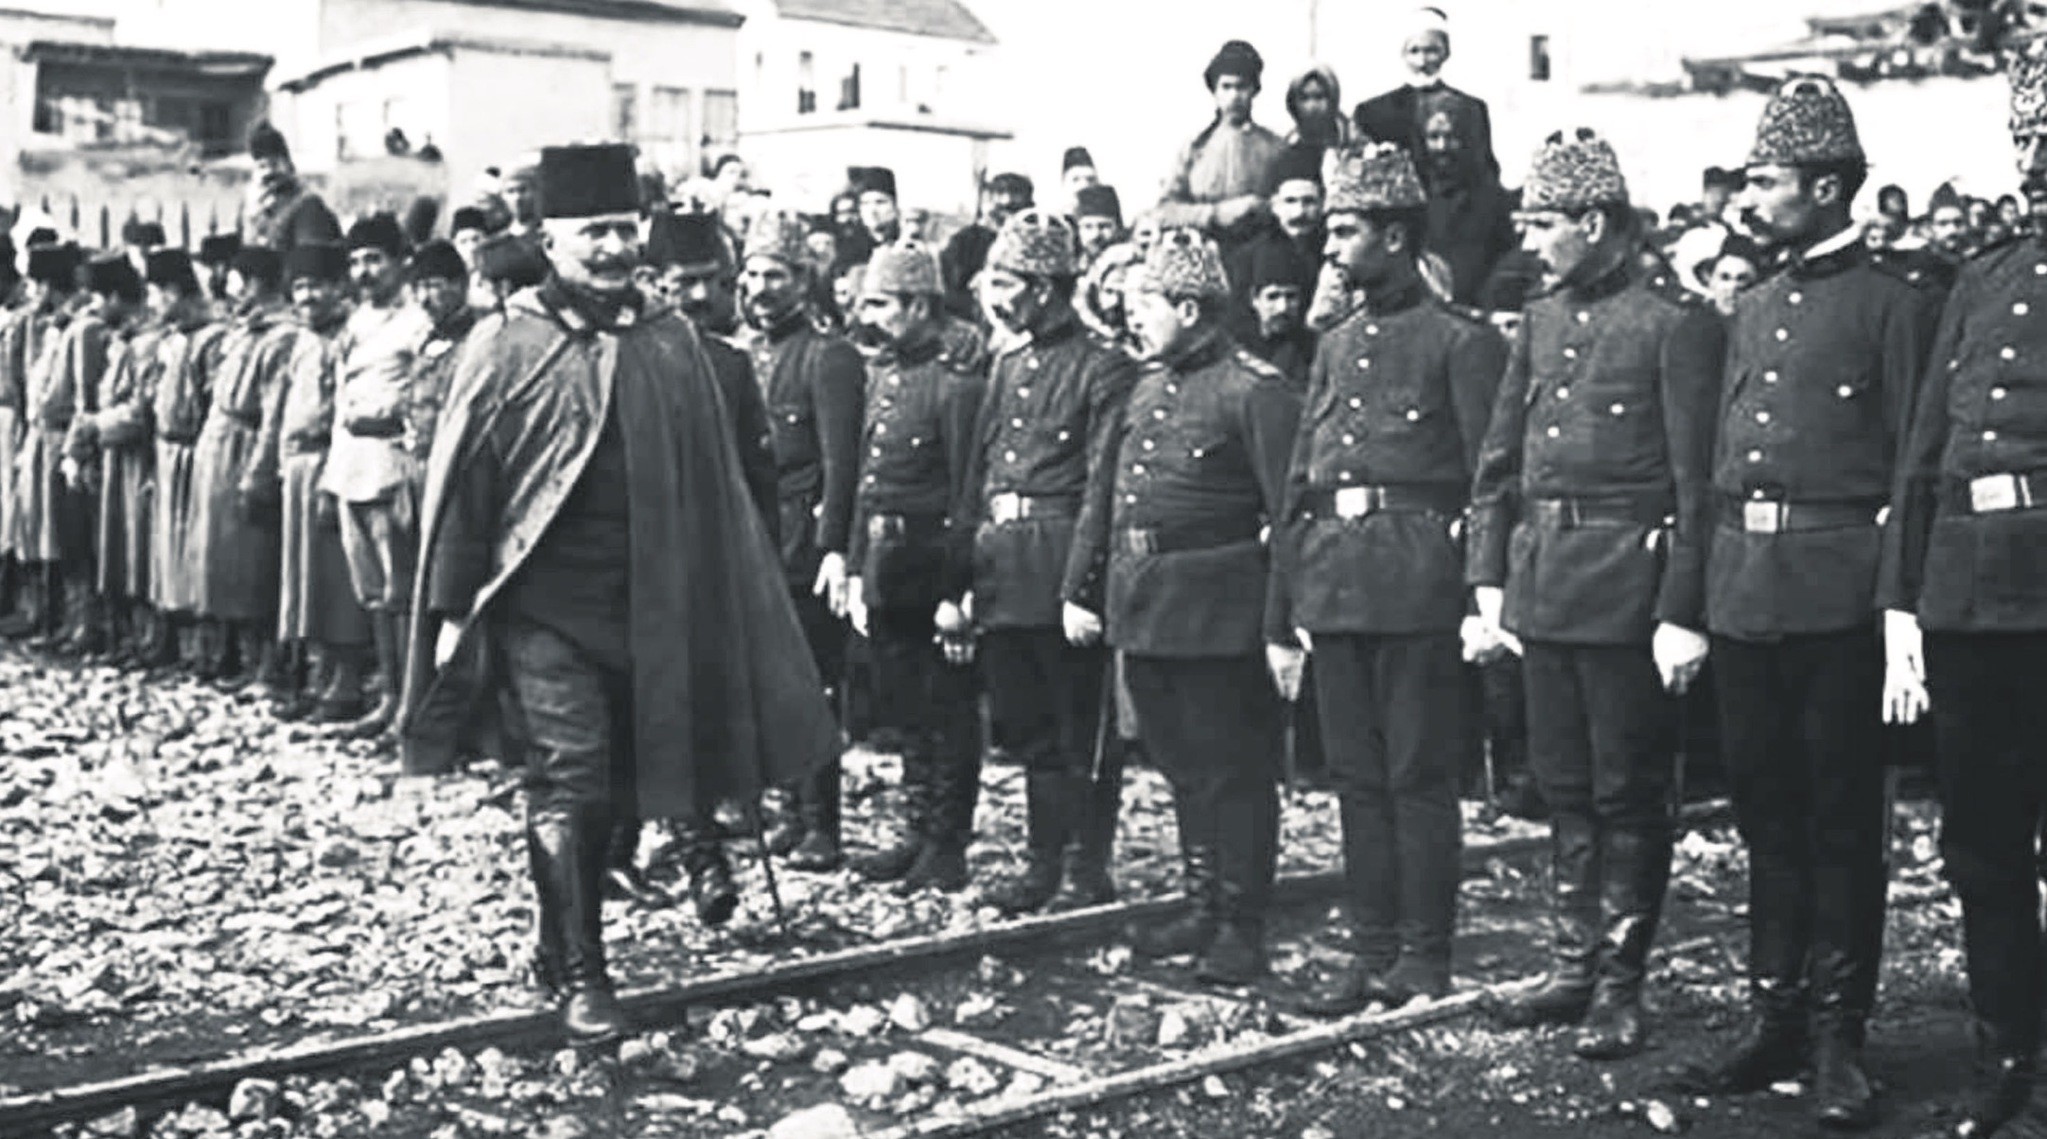 Fahreddin Pasha inspects his troops during the World War I.